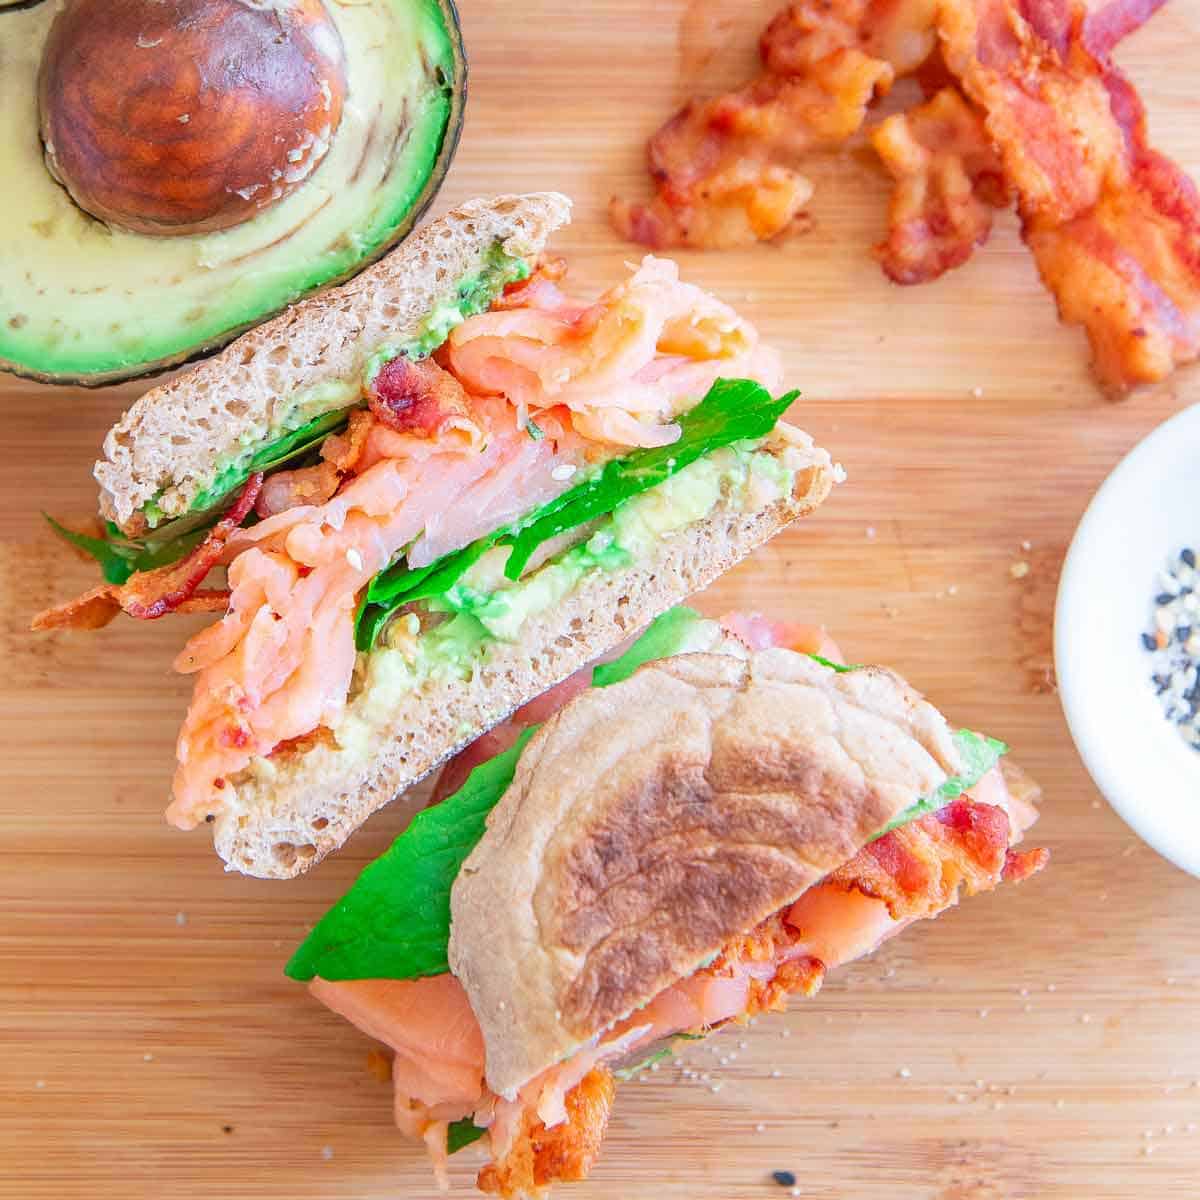 Smoked salmon is a great way to add some protein to your favorite BLT. Smashed avocado and everything bagel seasoning makes this one even more delicious!